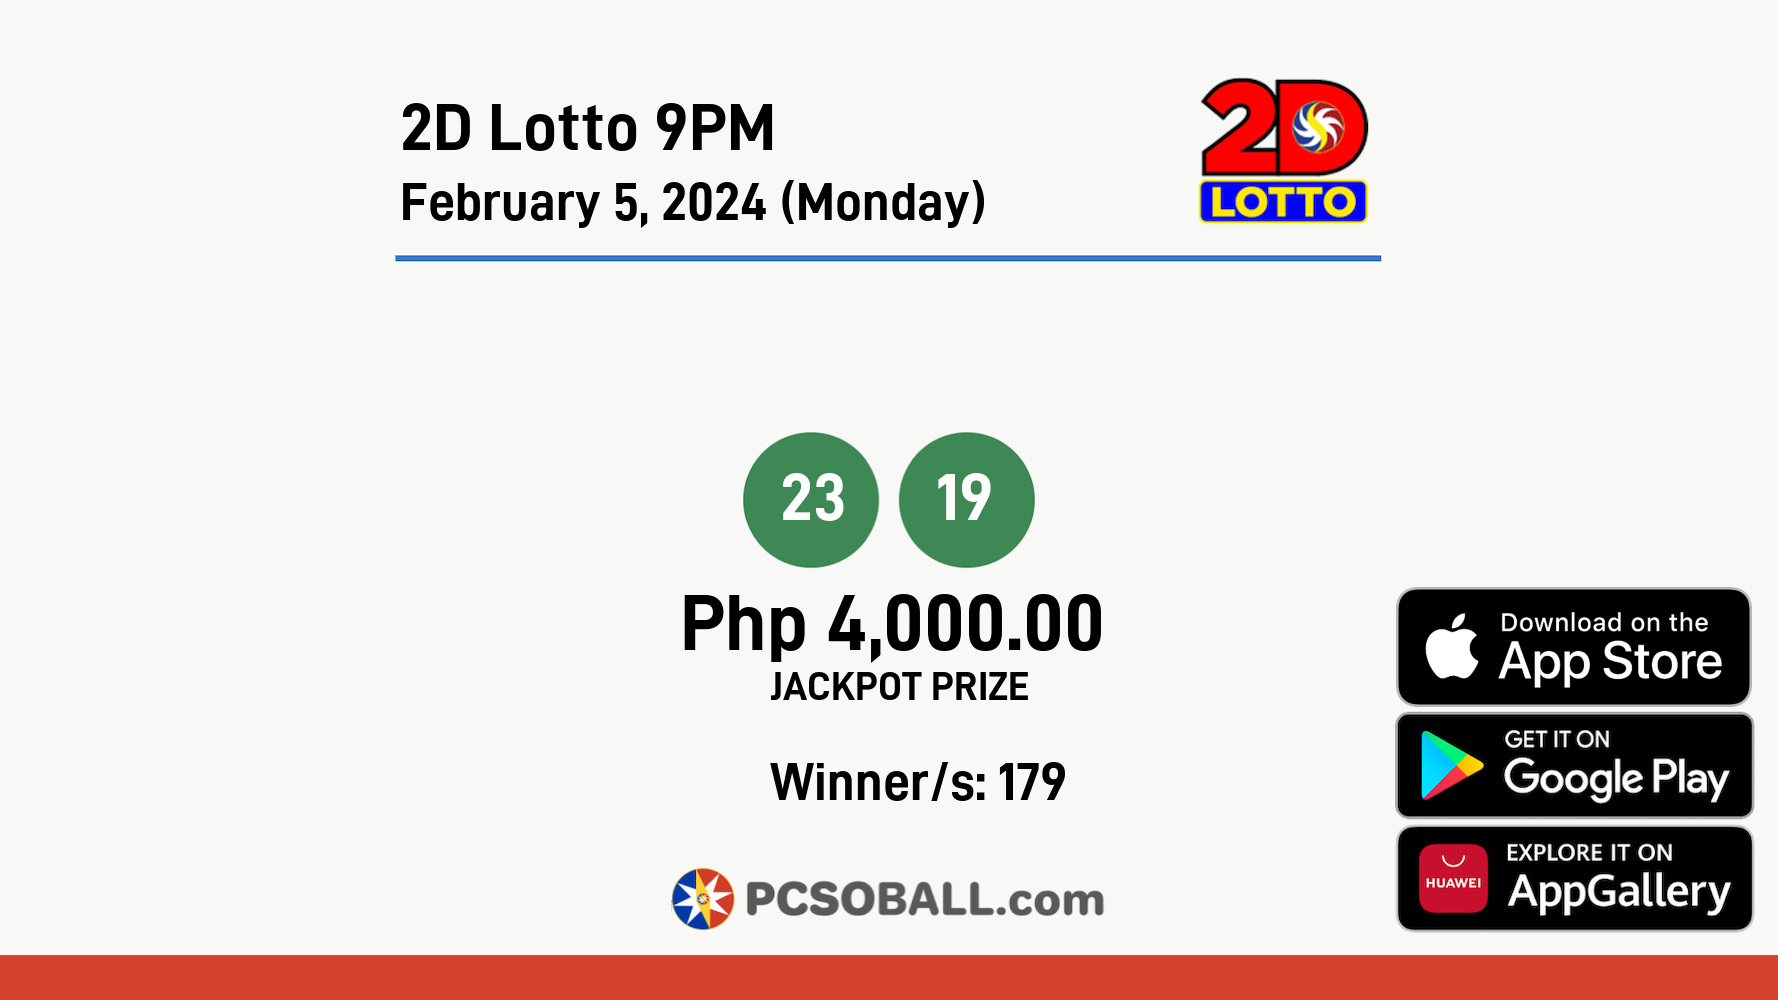 2D Lotto 9PM February 5, 2024 (Monday) Result